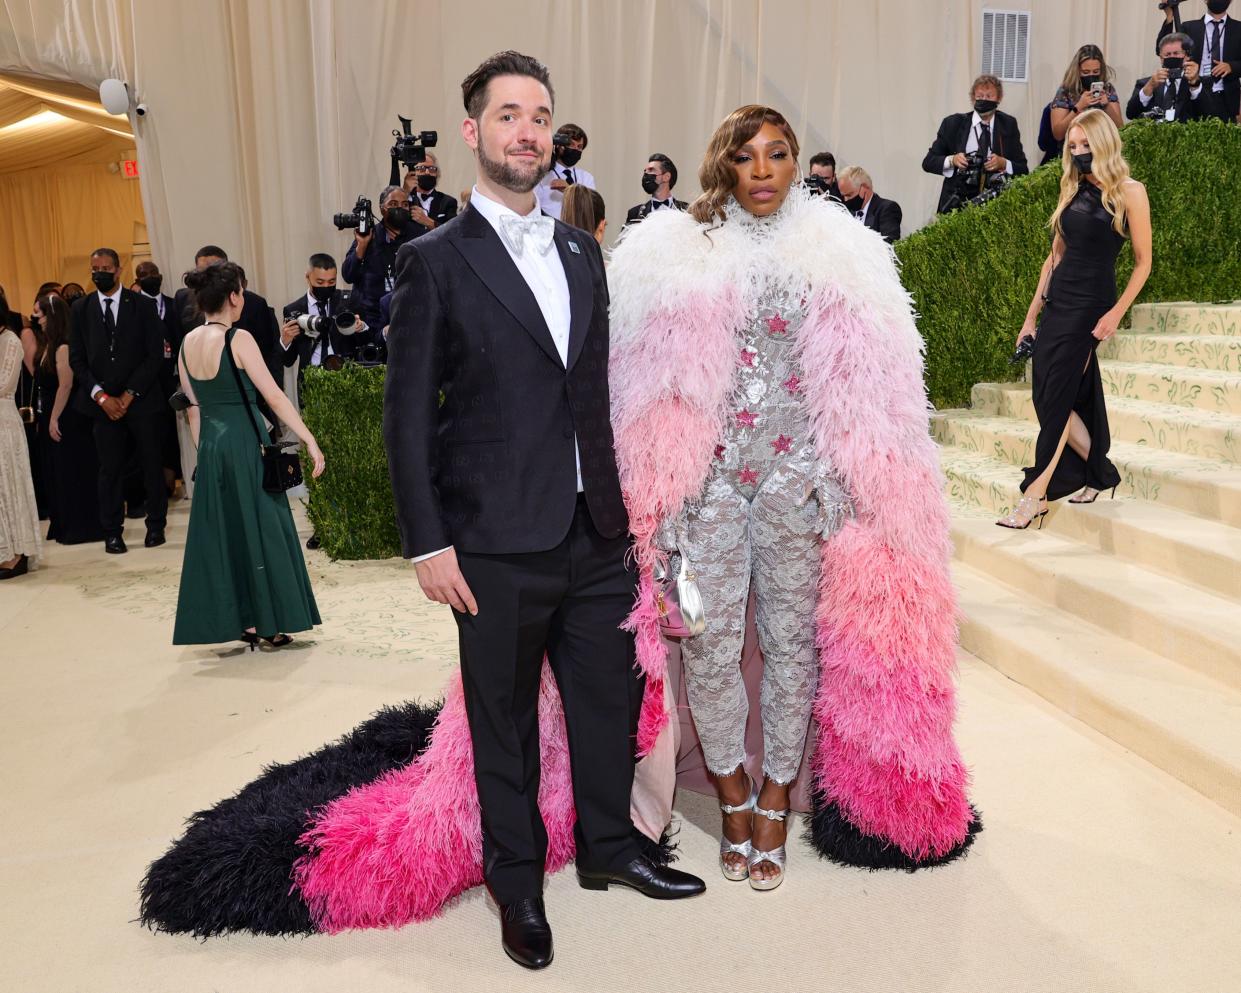 Alexis Ohanian and Serena Williams attend The 2021 Met Gala Celebrating In America: A Lexicon Of Fashion at Metropolitan Museum of Art on Sept. 13, 2021 in New York.